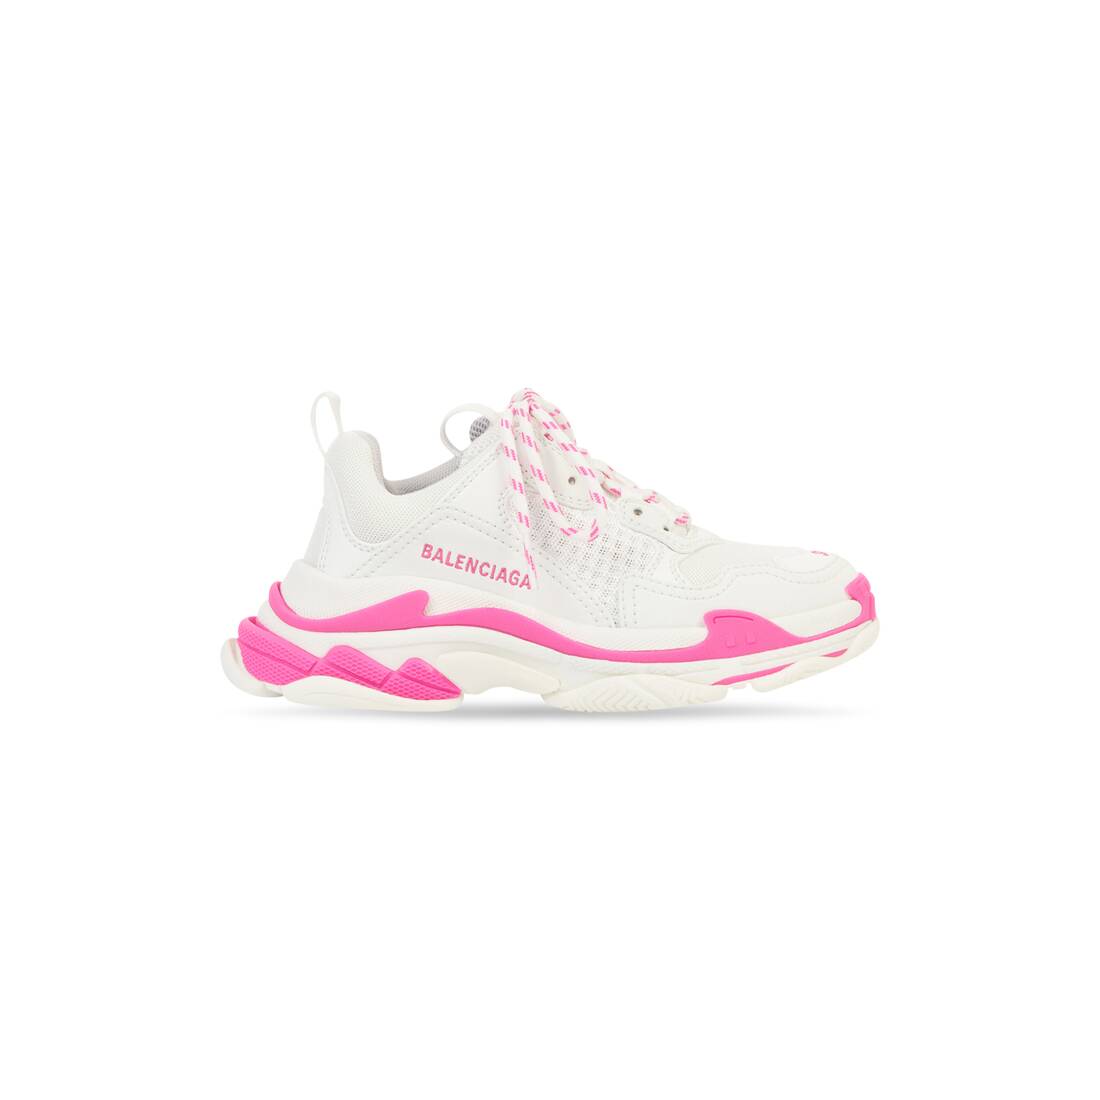 balenciaga.com | Kids - Triple S Trainers in neon pink, white and grey double foam and mesh